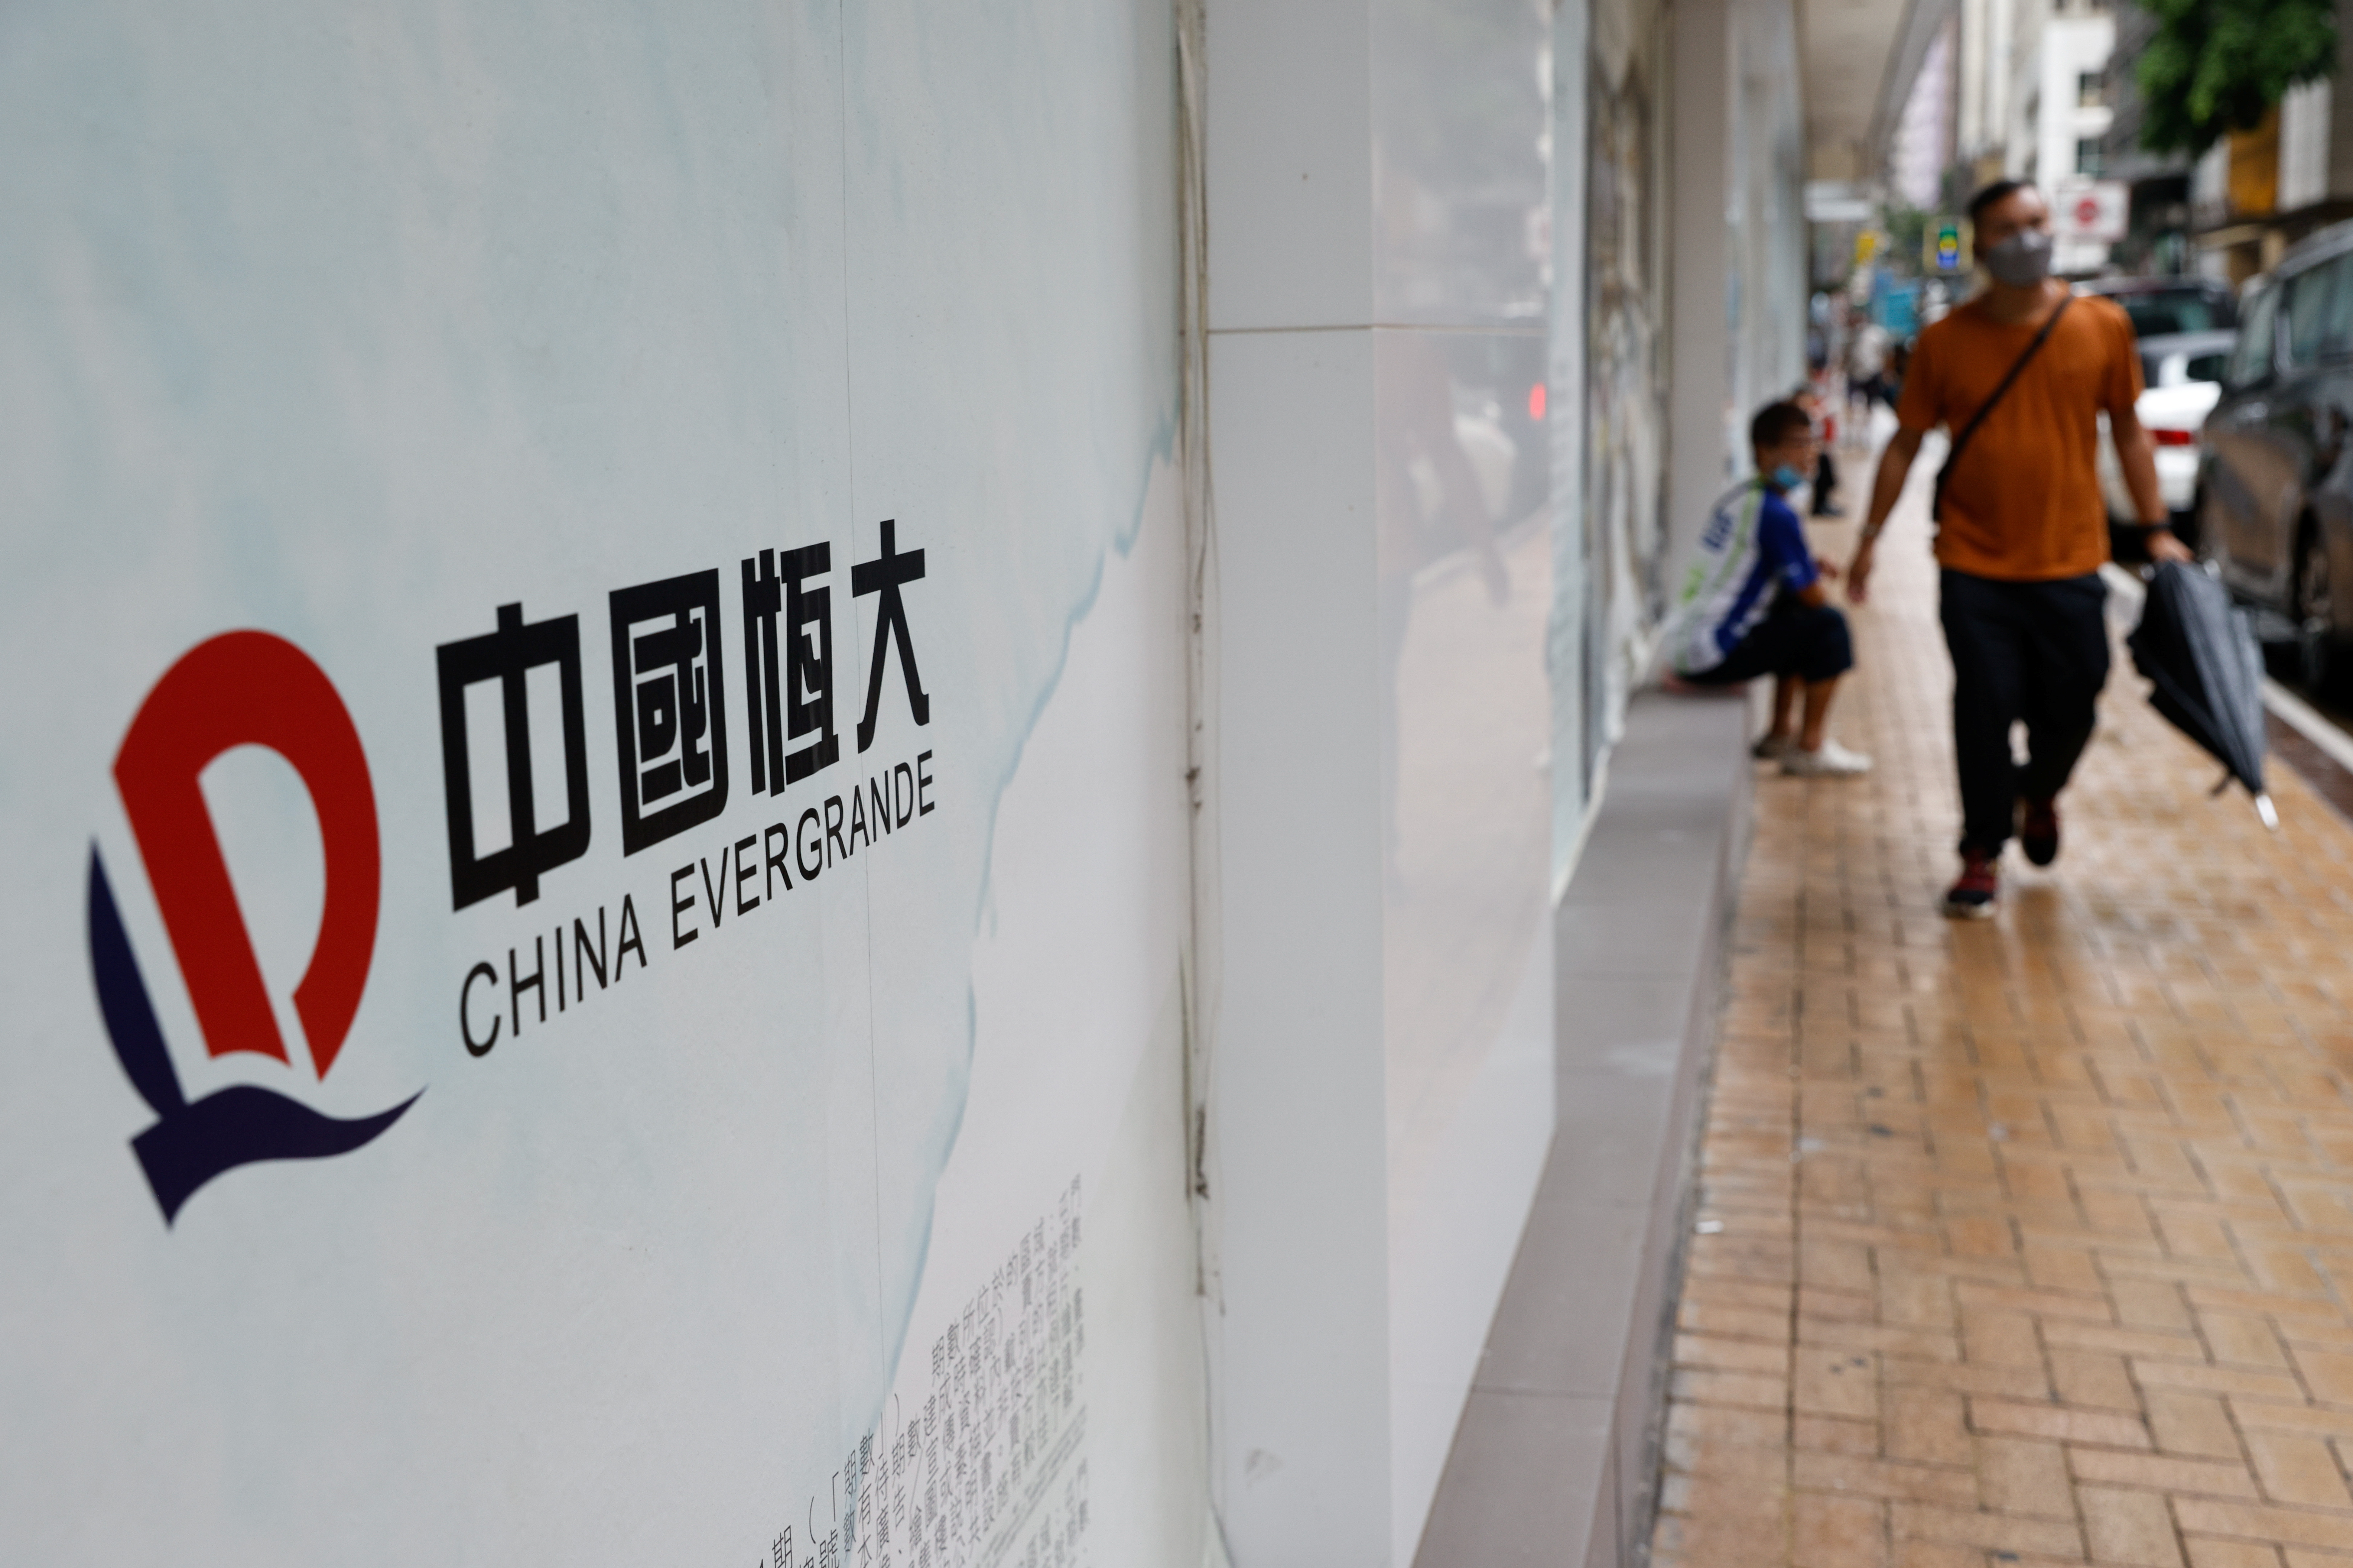 The logo of China Evergrande is seen at outside China Evergrande Centre building in Hong Kong, China September 23, 2021. REUTERS/Tyrone Siu